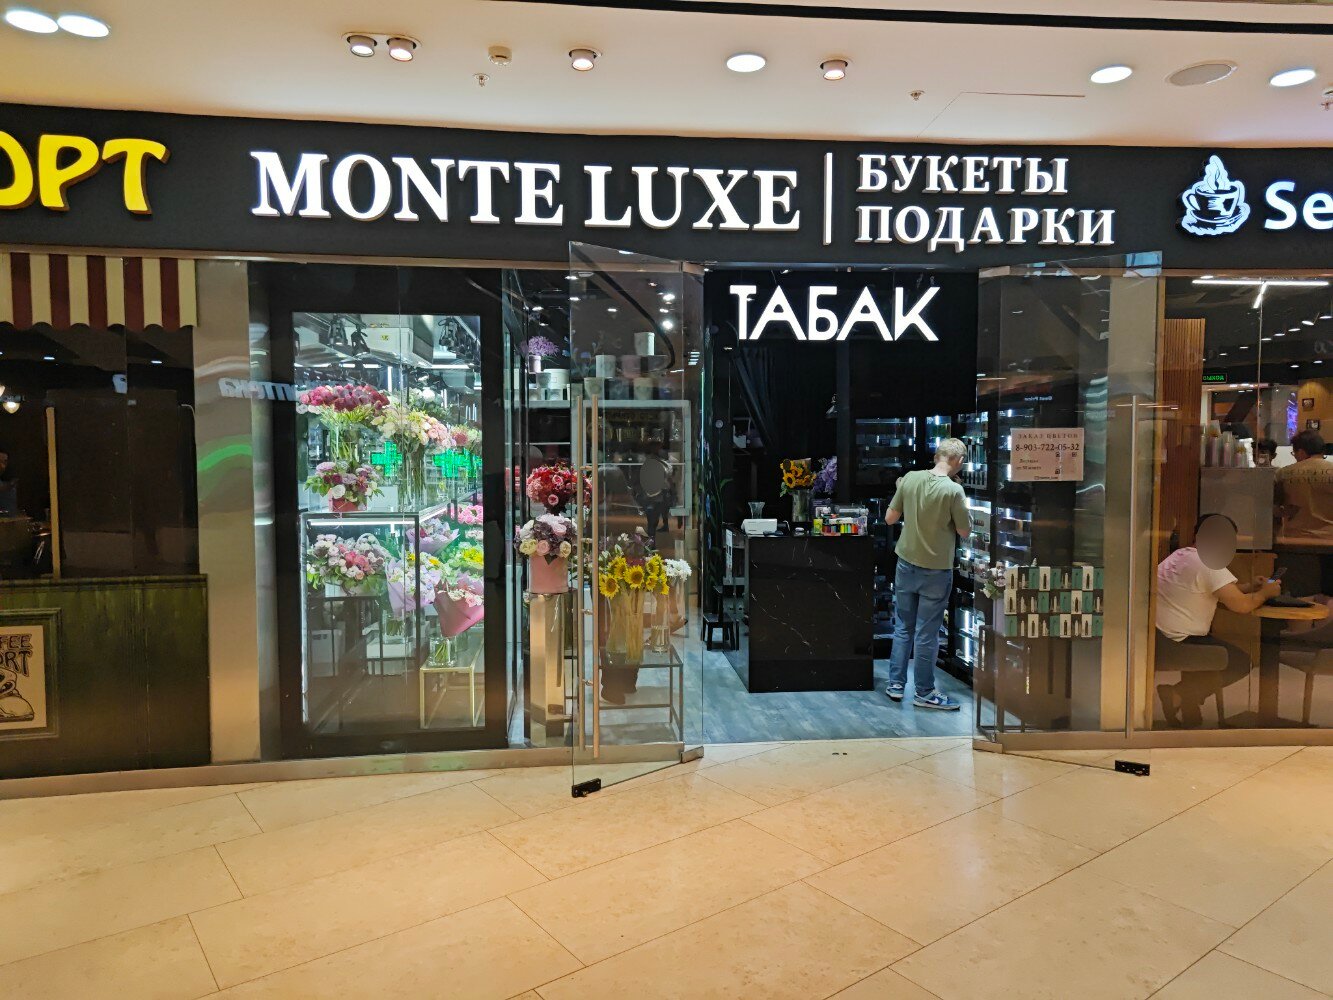 Monte luxe